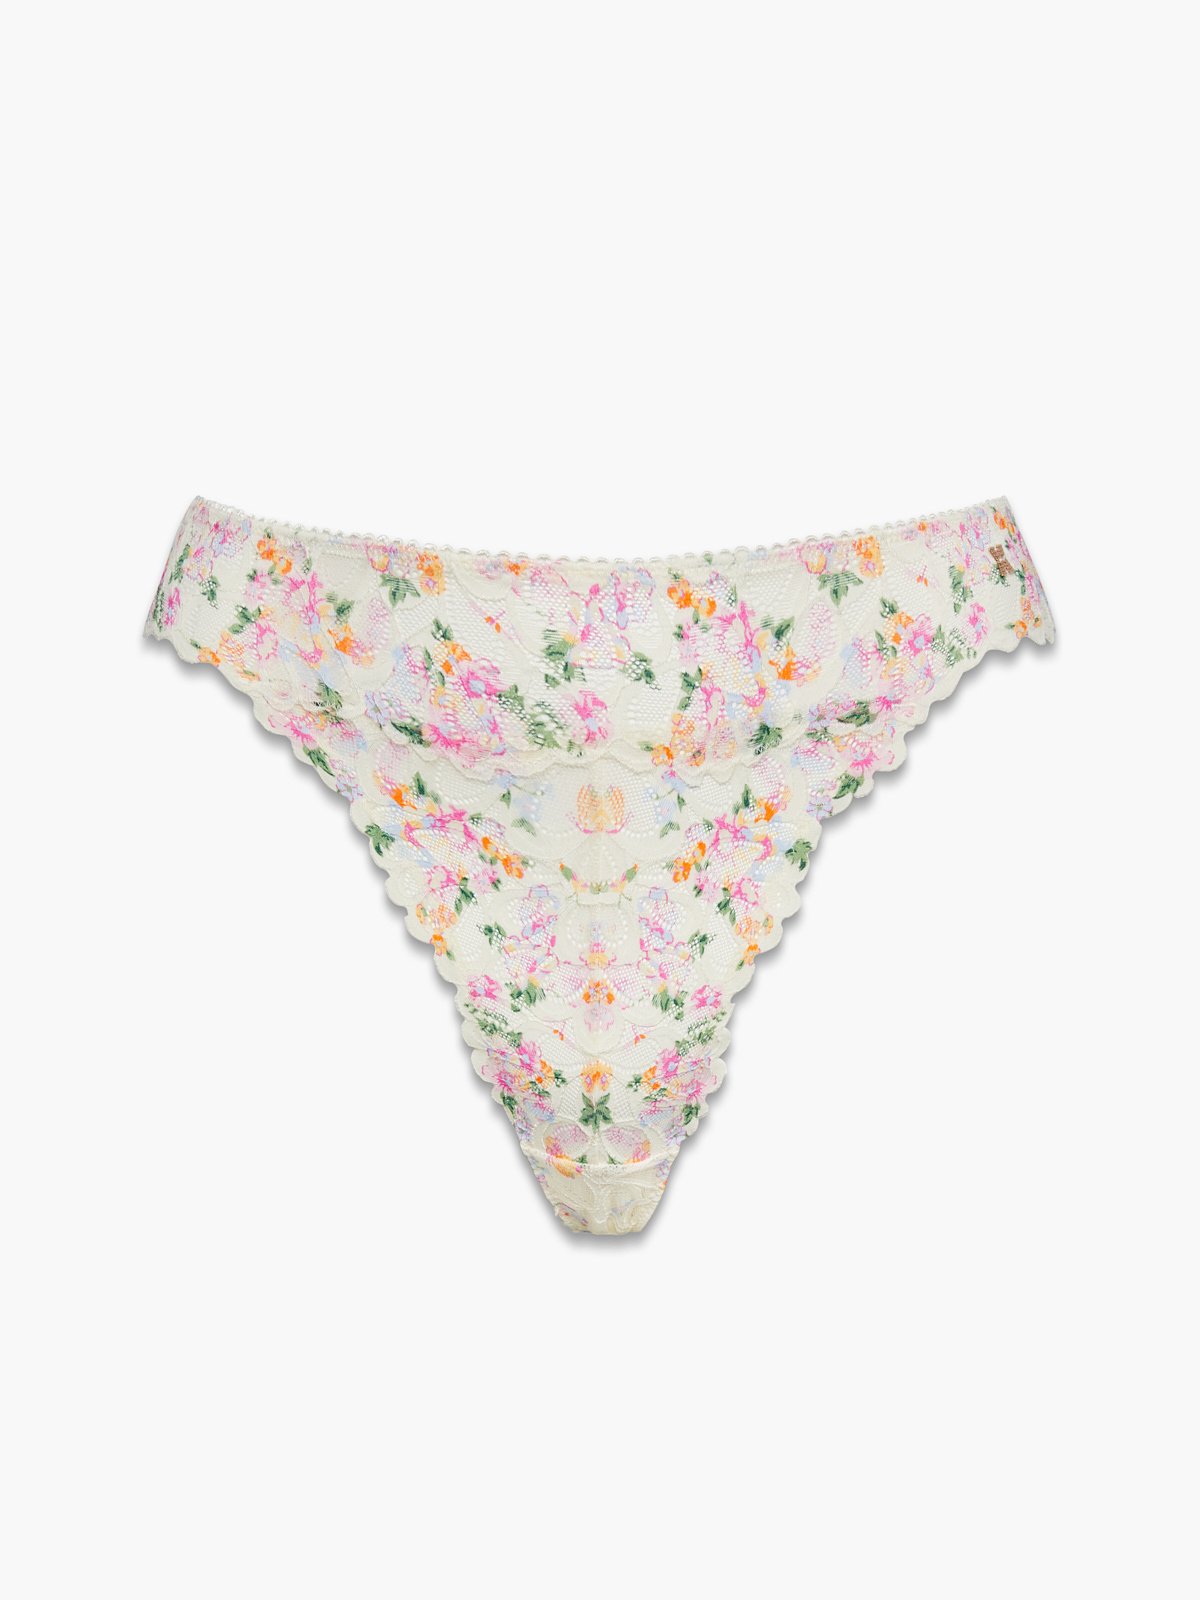 Savage Not Sorry Lace Thong Panty in Multi & White | SAVAGE X FENTY